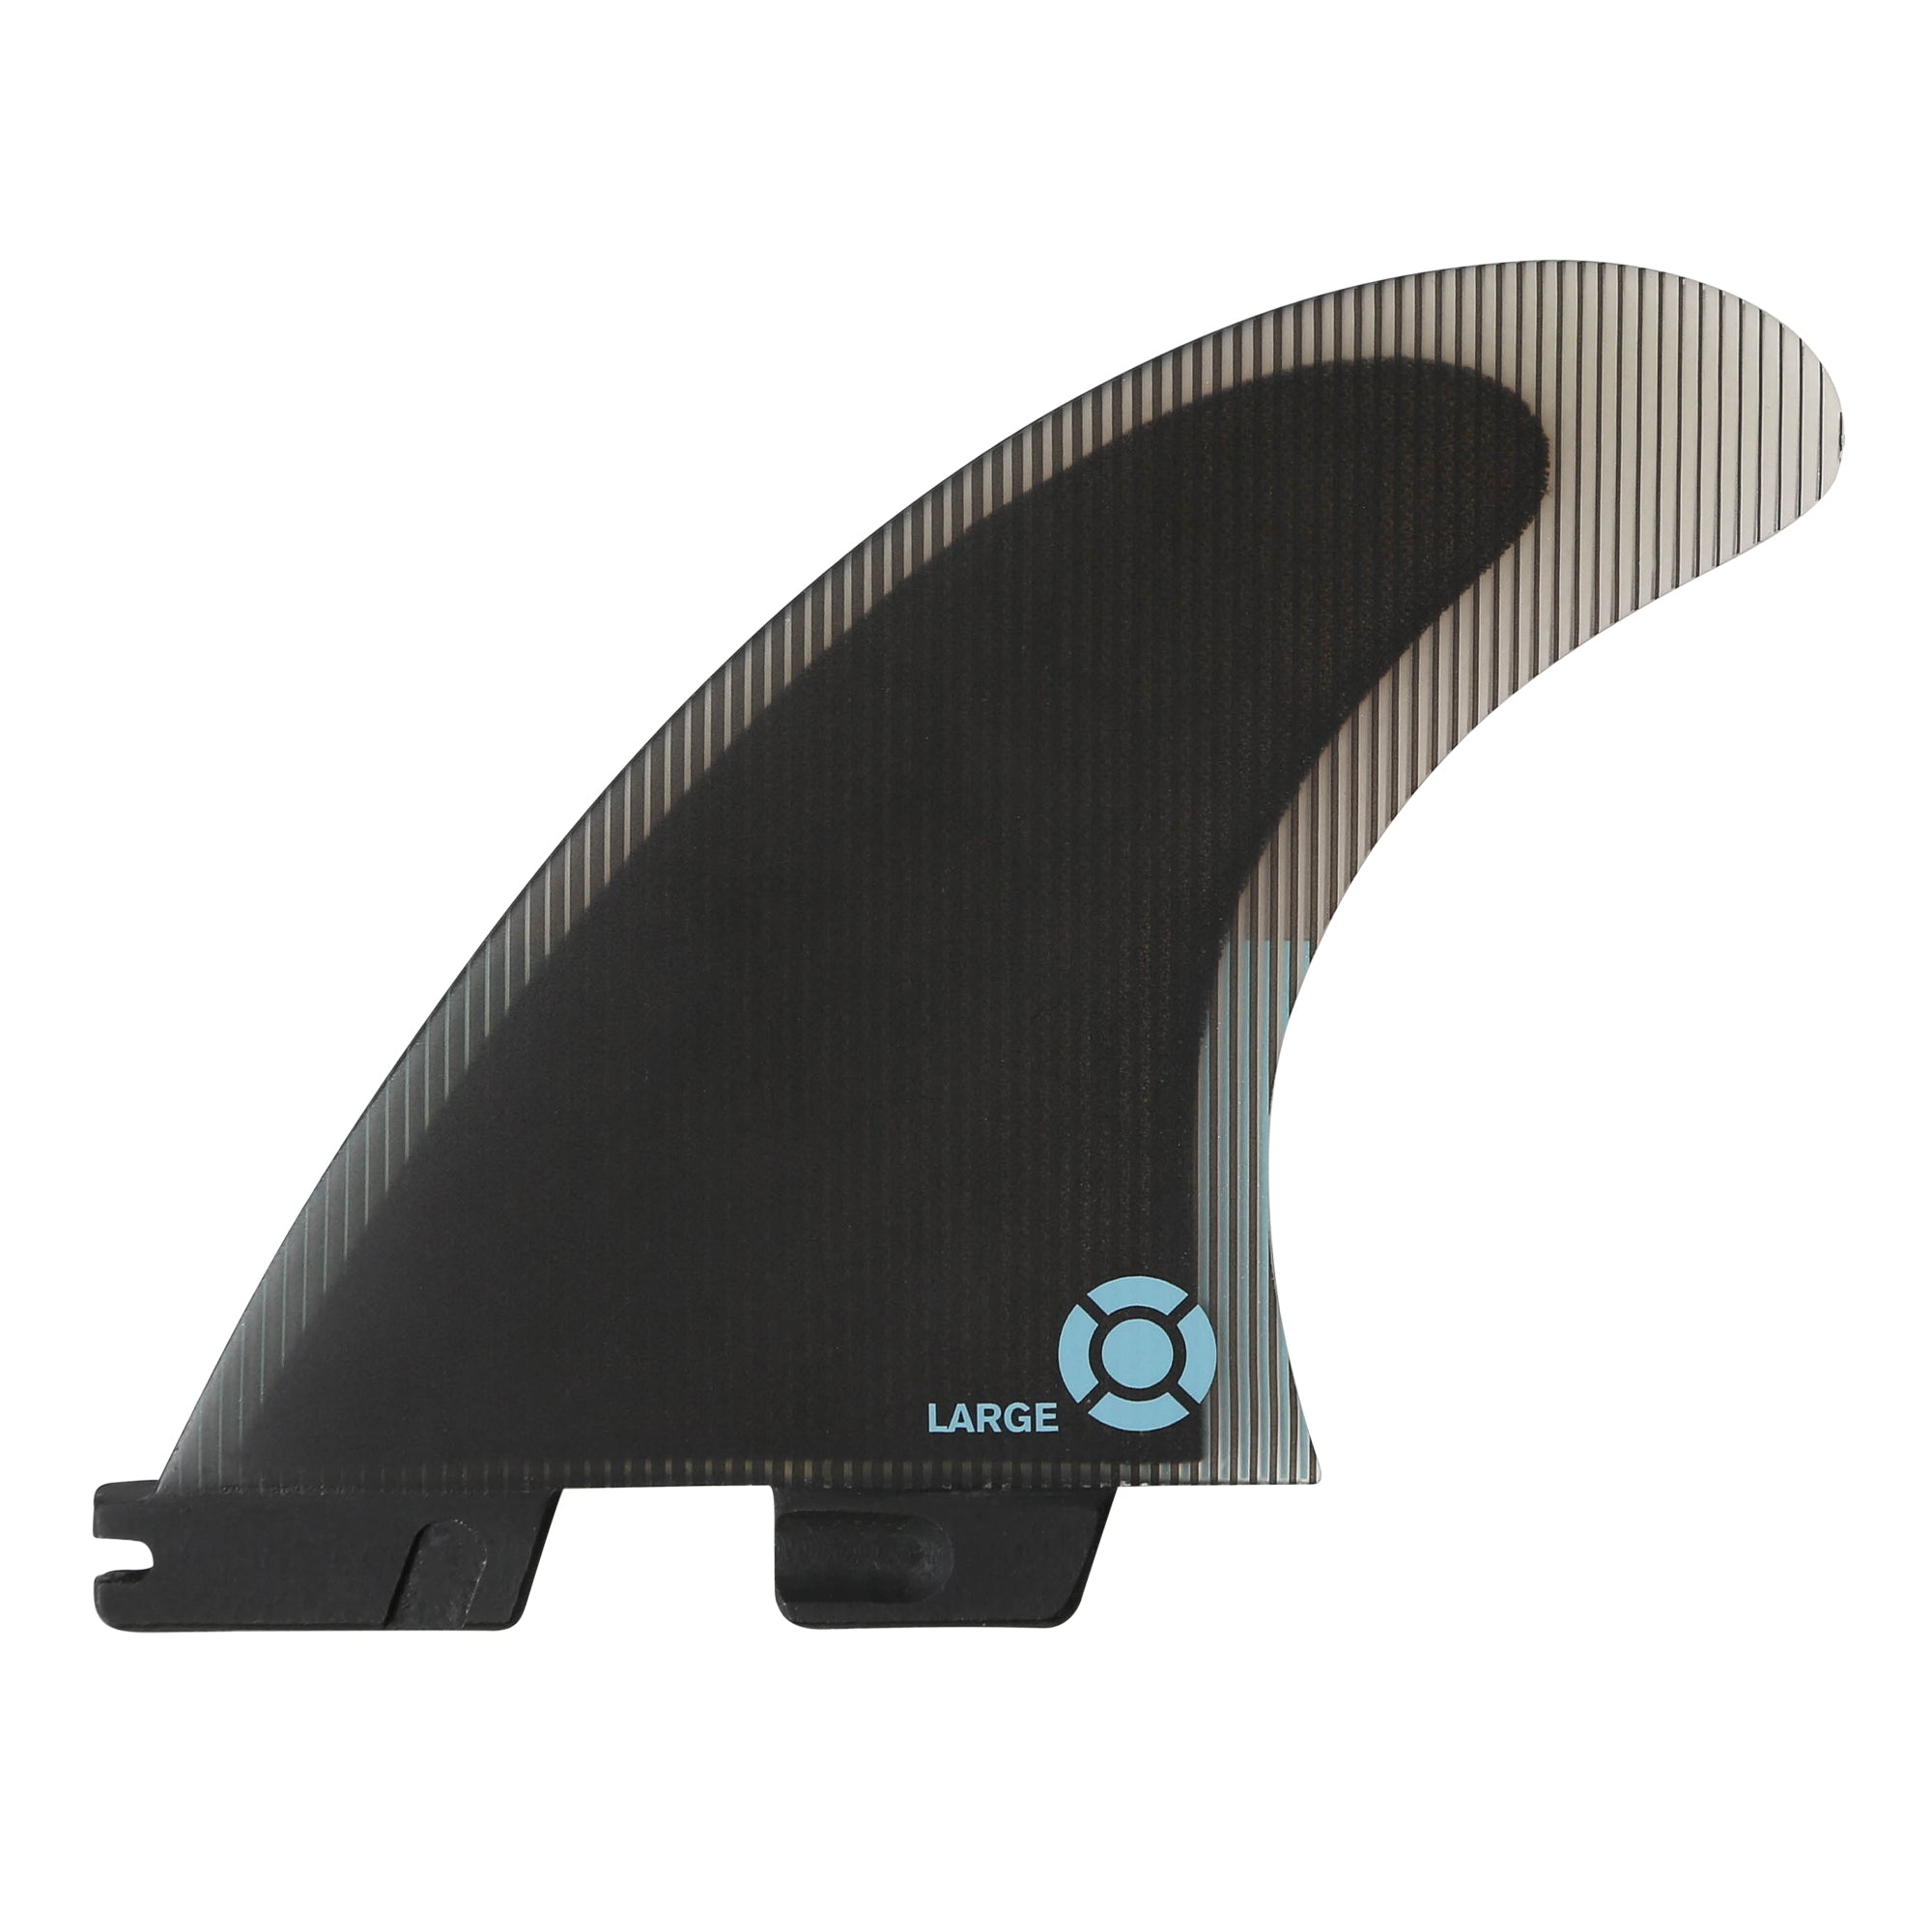 FCS II PERFORMER PC THRUSTER FINS Tranquil Blue-Jungle Surf Store-Bali-Indonesia